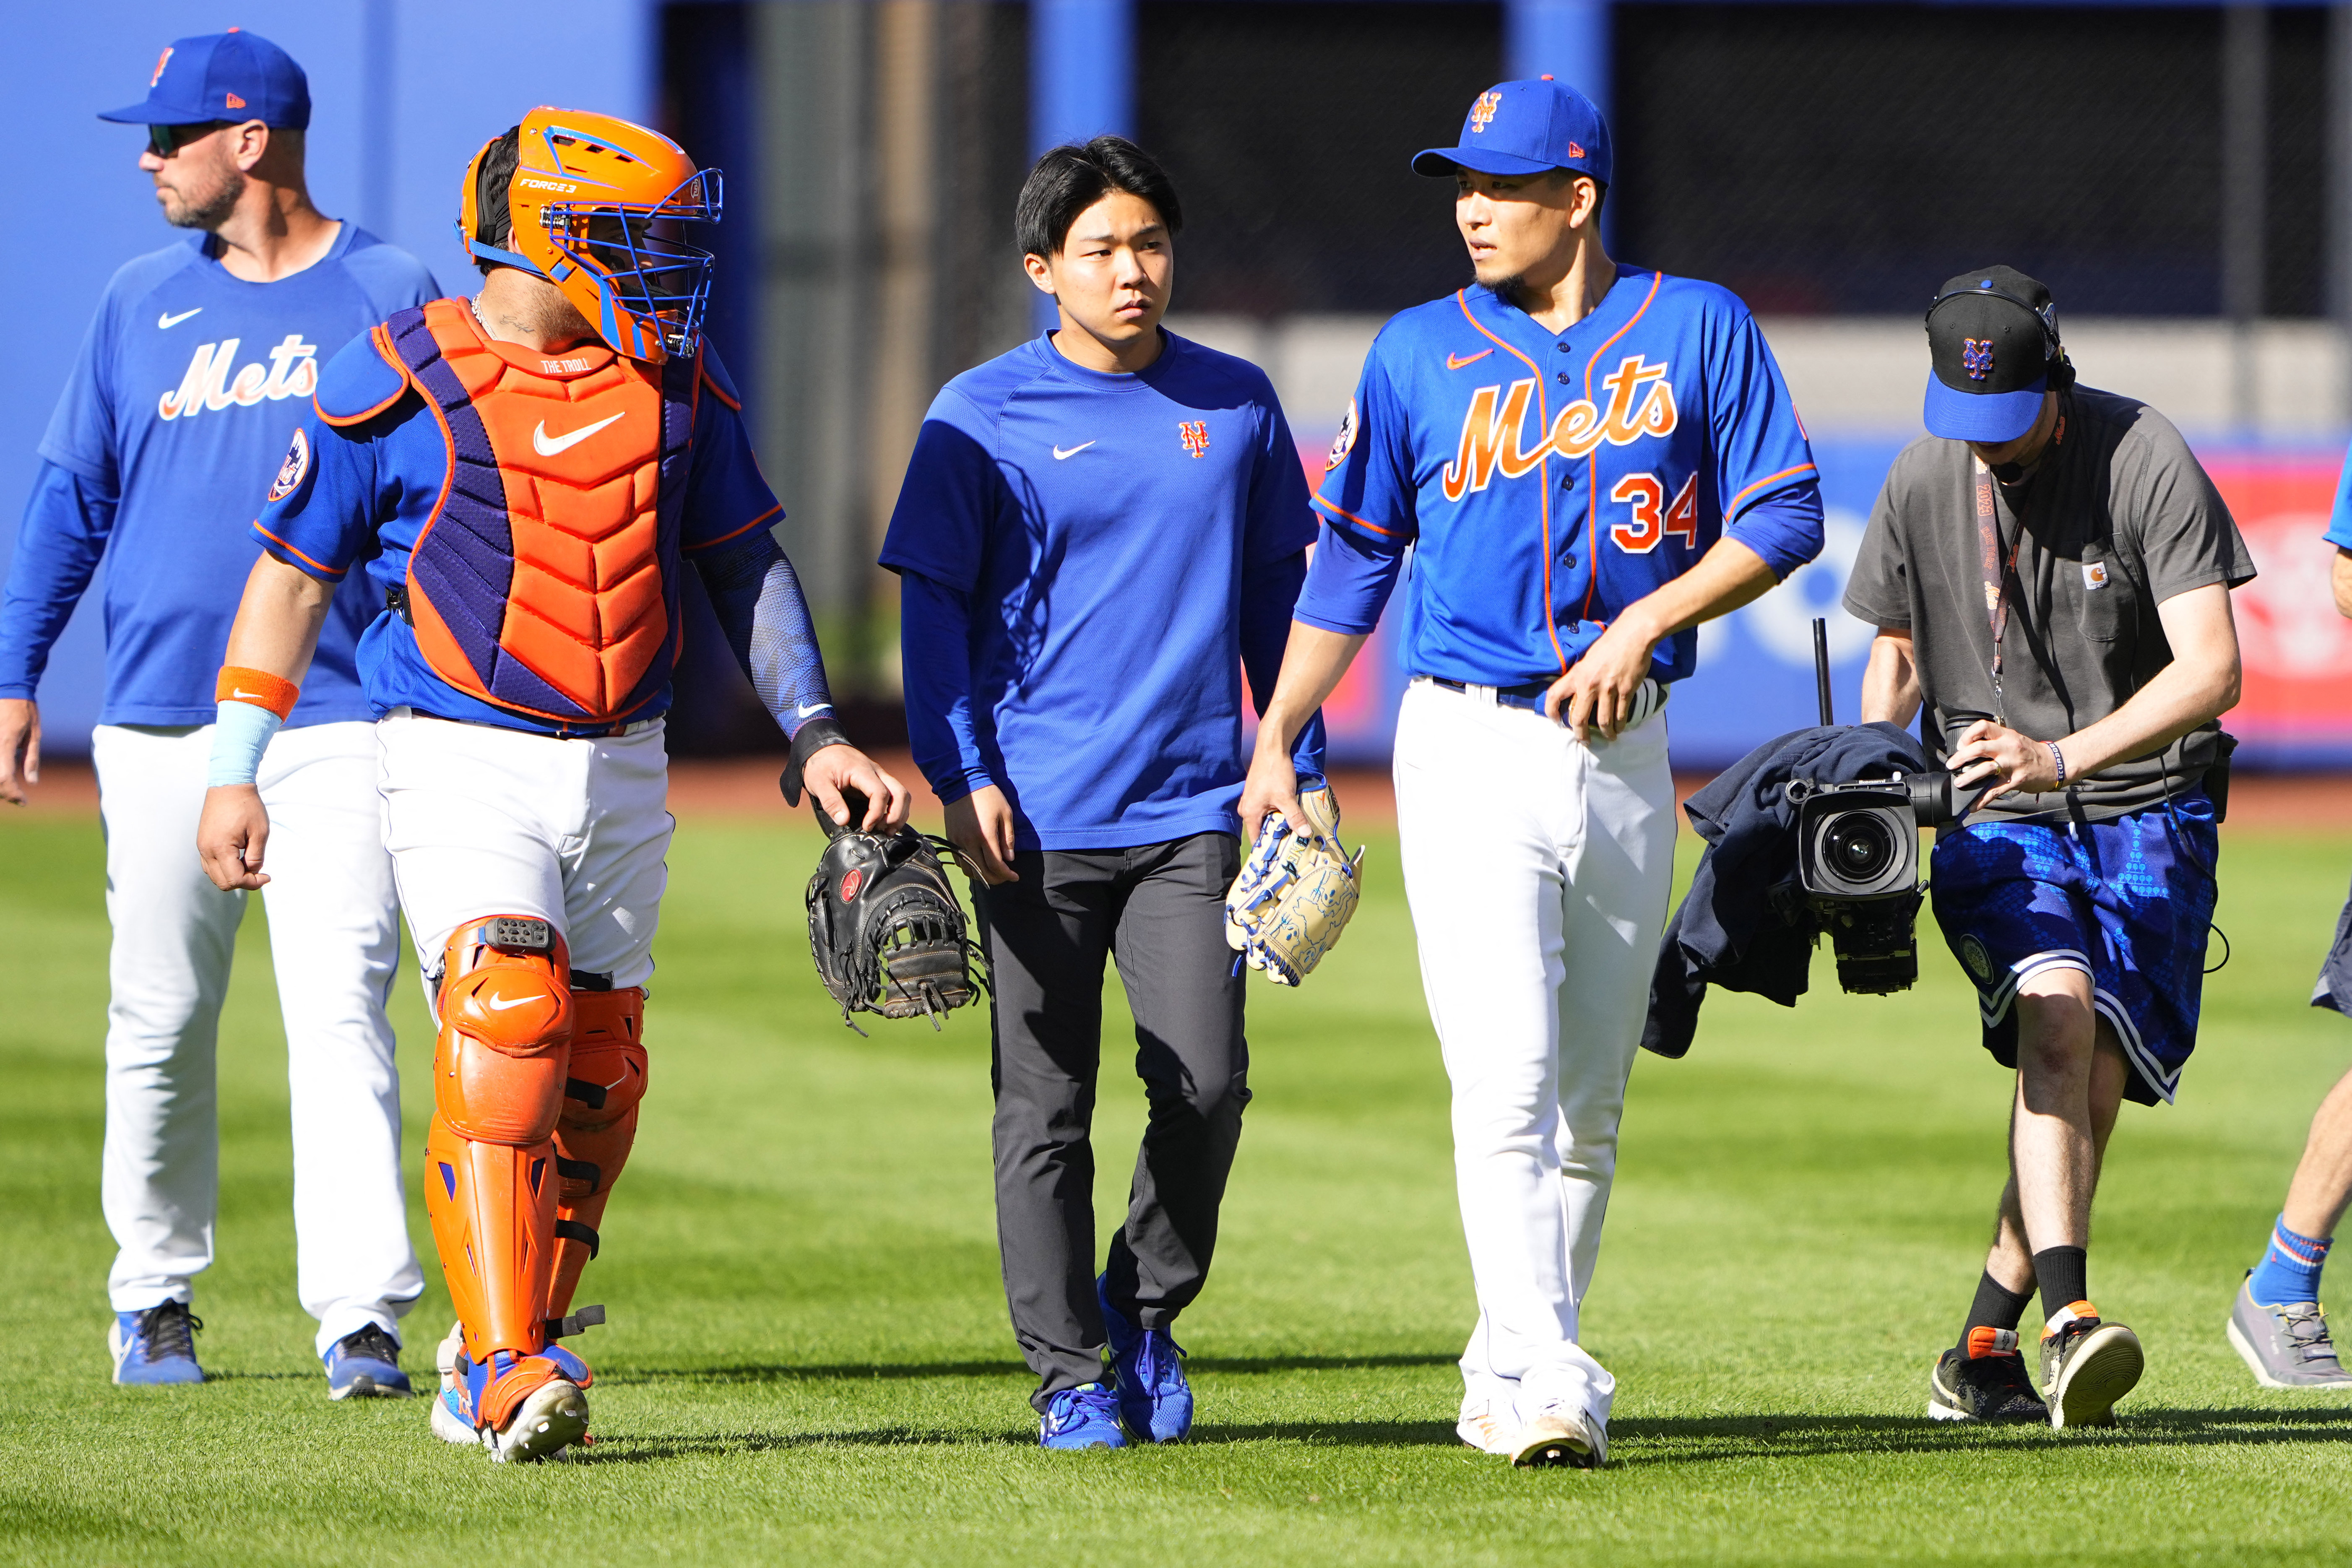 Mets game rained out for third time in last four days